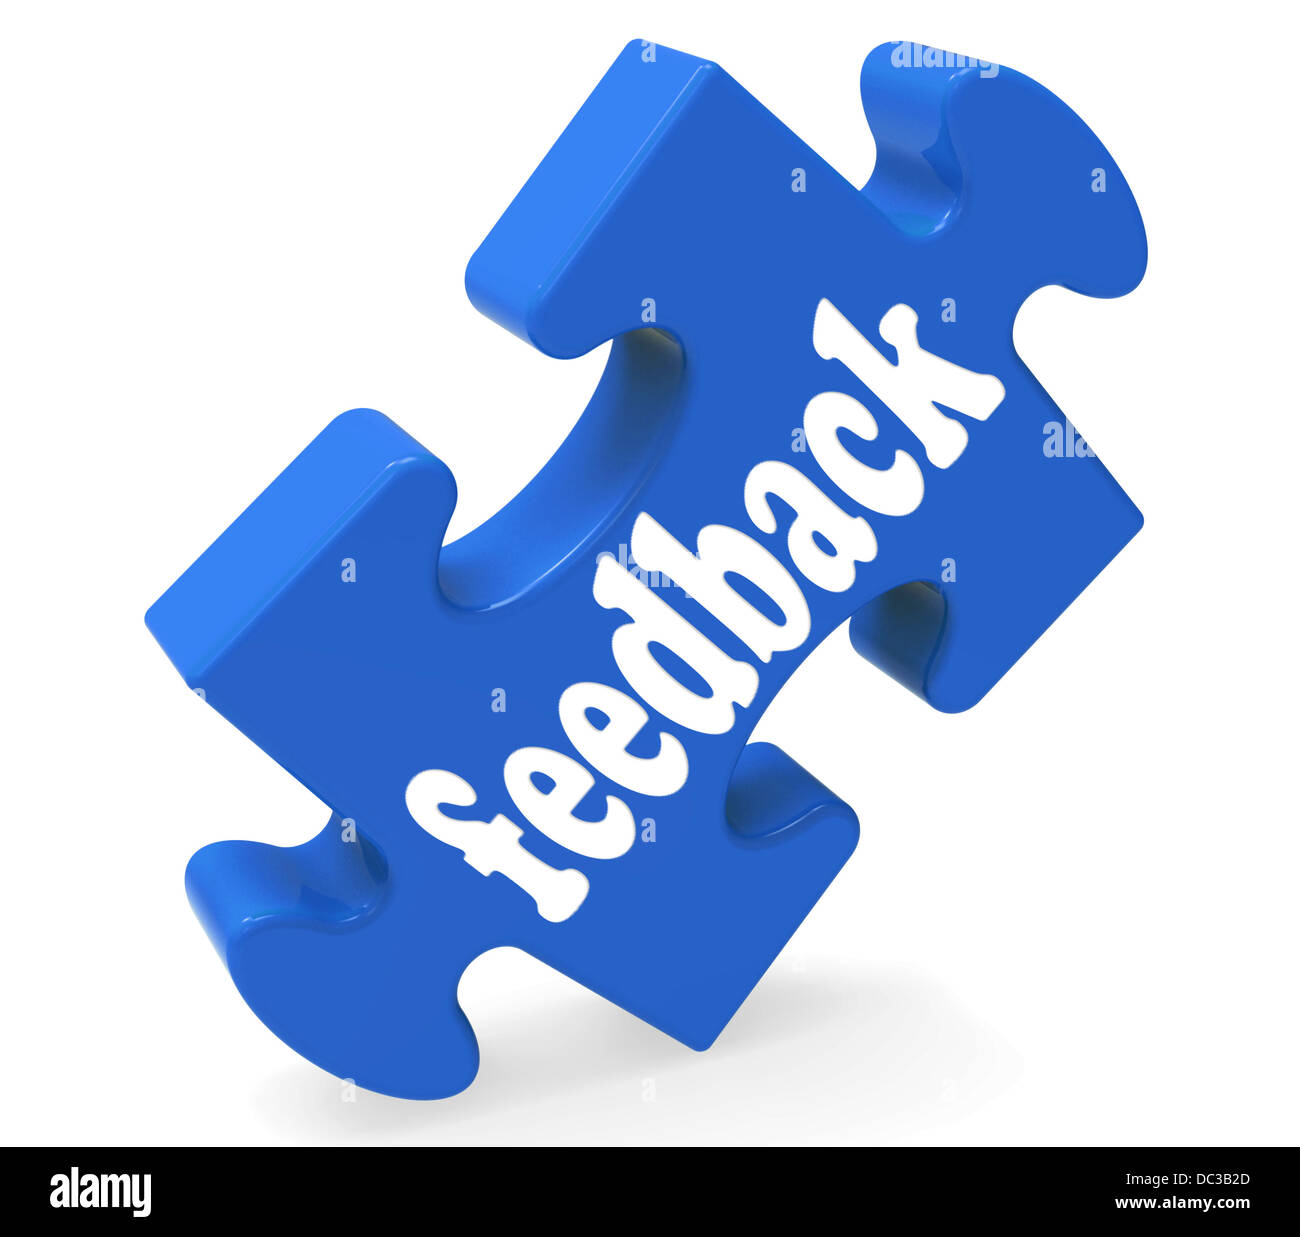 Feedback Means Opinion Comment Surveys Stock Photo